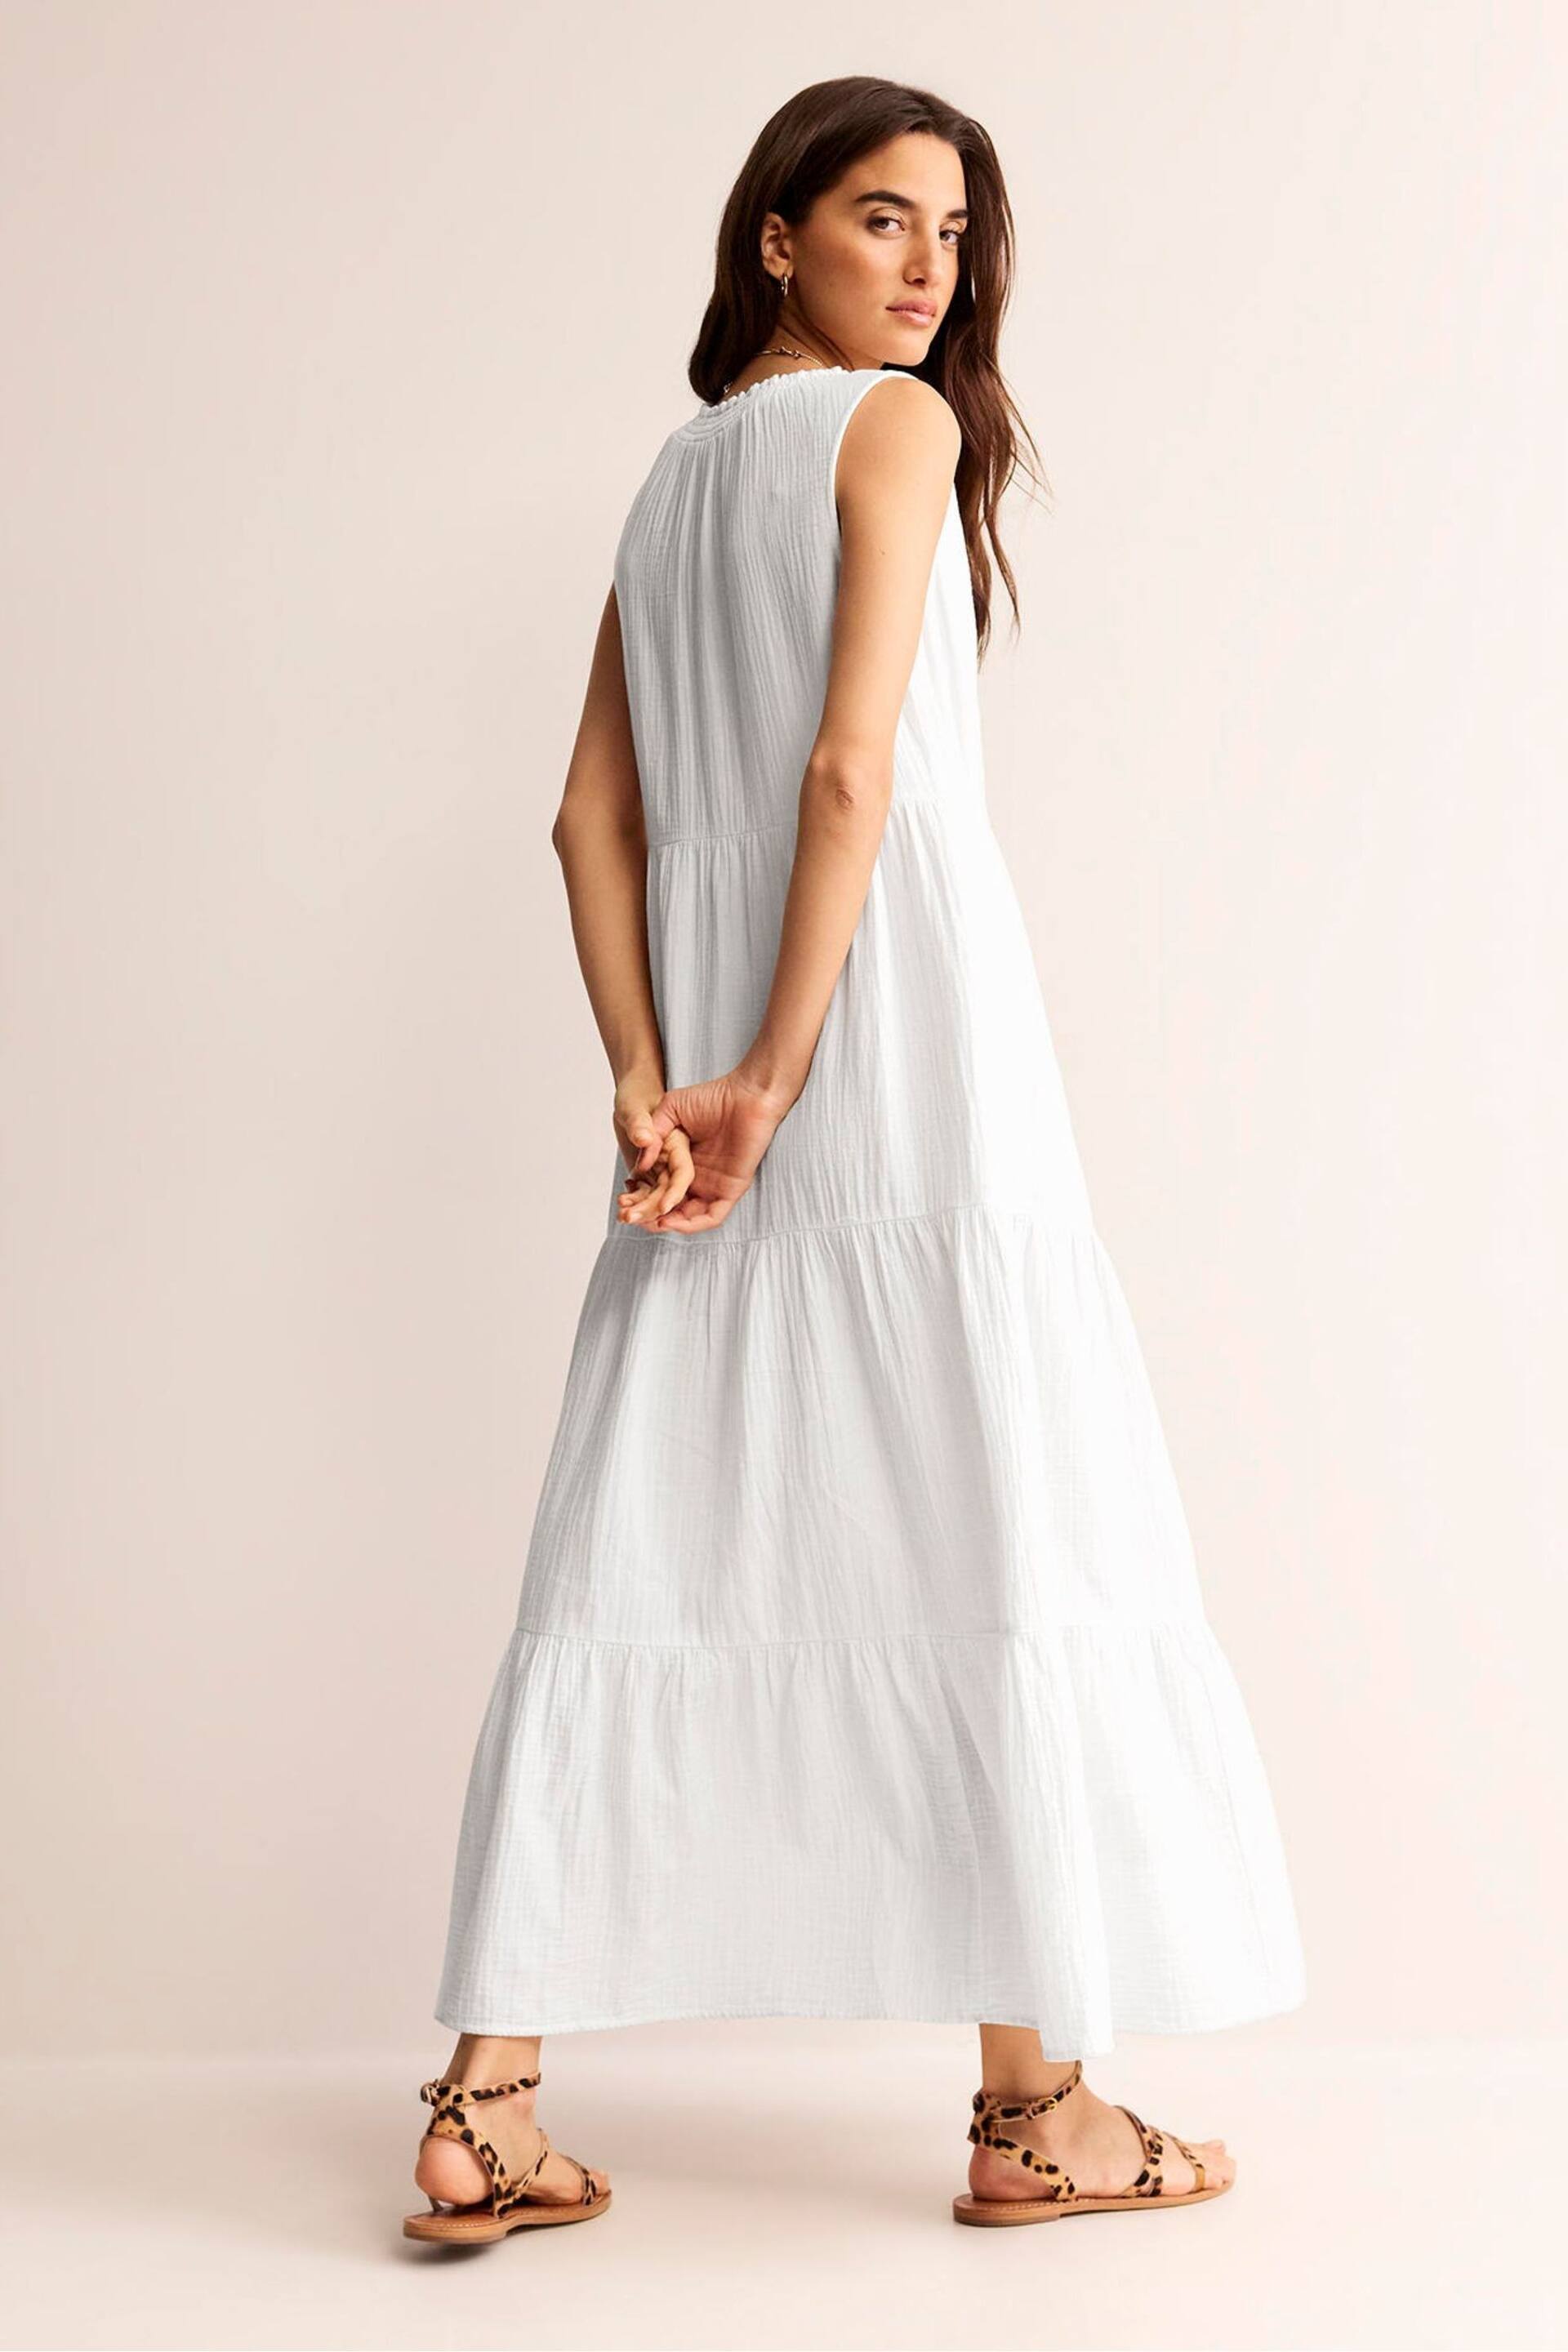 Boden White Double Cloth Maxi Tiered Dress - Image 4 of 6